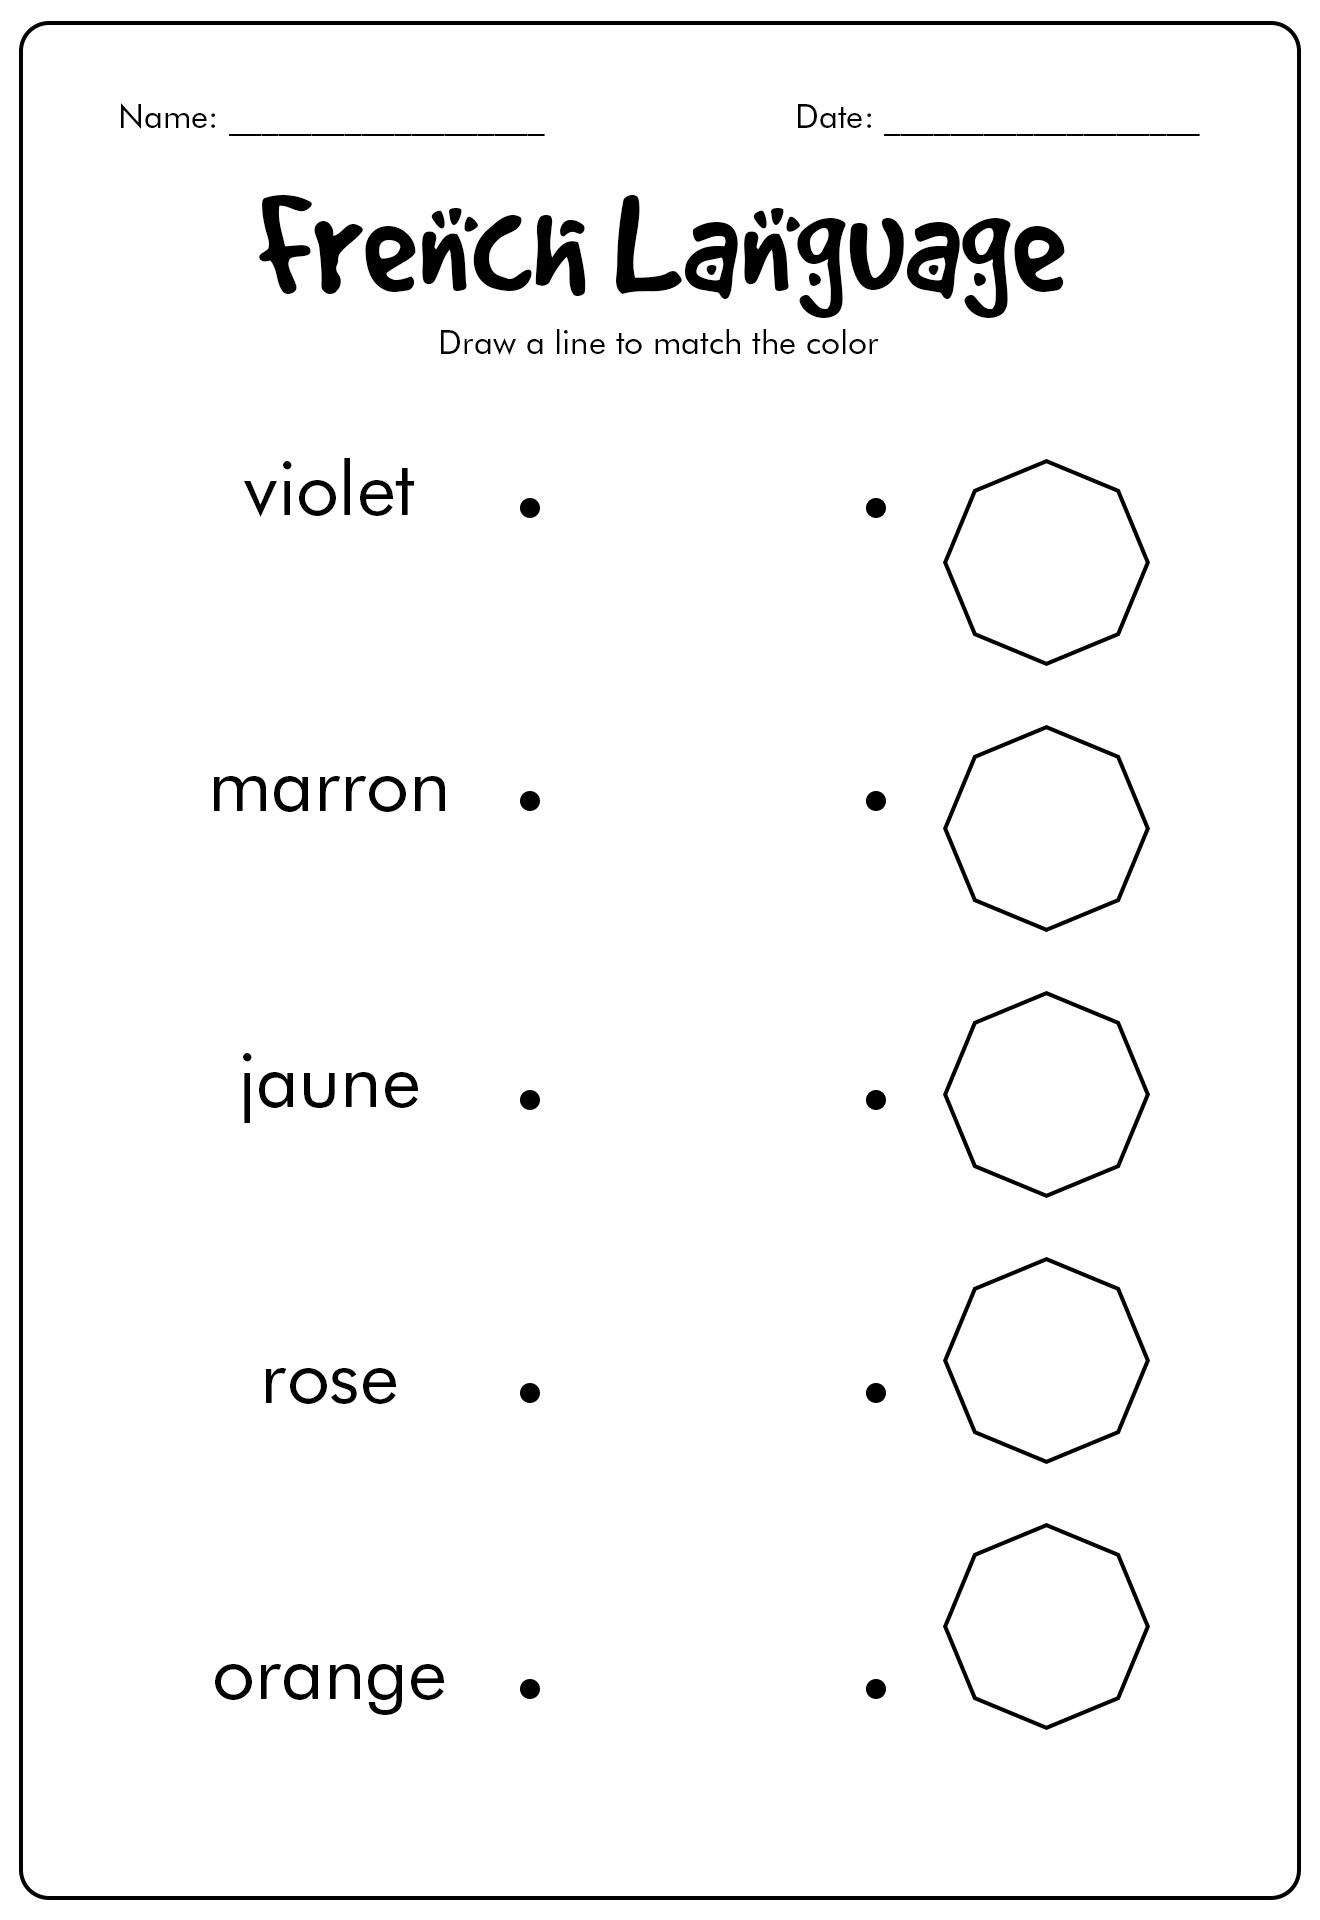 11-best-images-of-beginner-french-worksheets-free-printable-french-worksheets-beginners